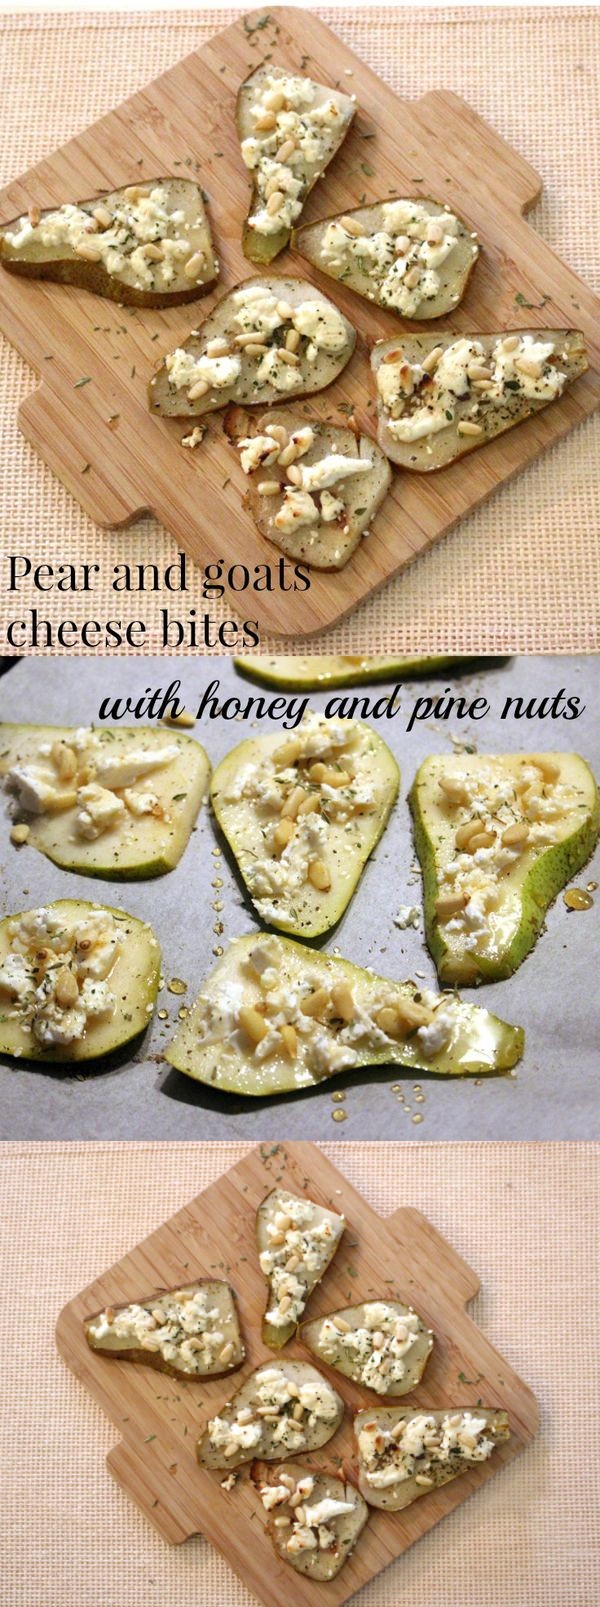 Pear and goats cheese bites